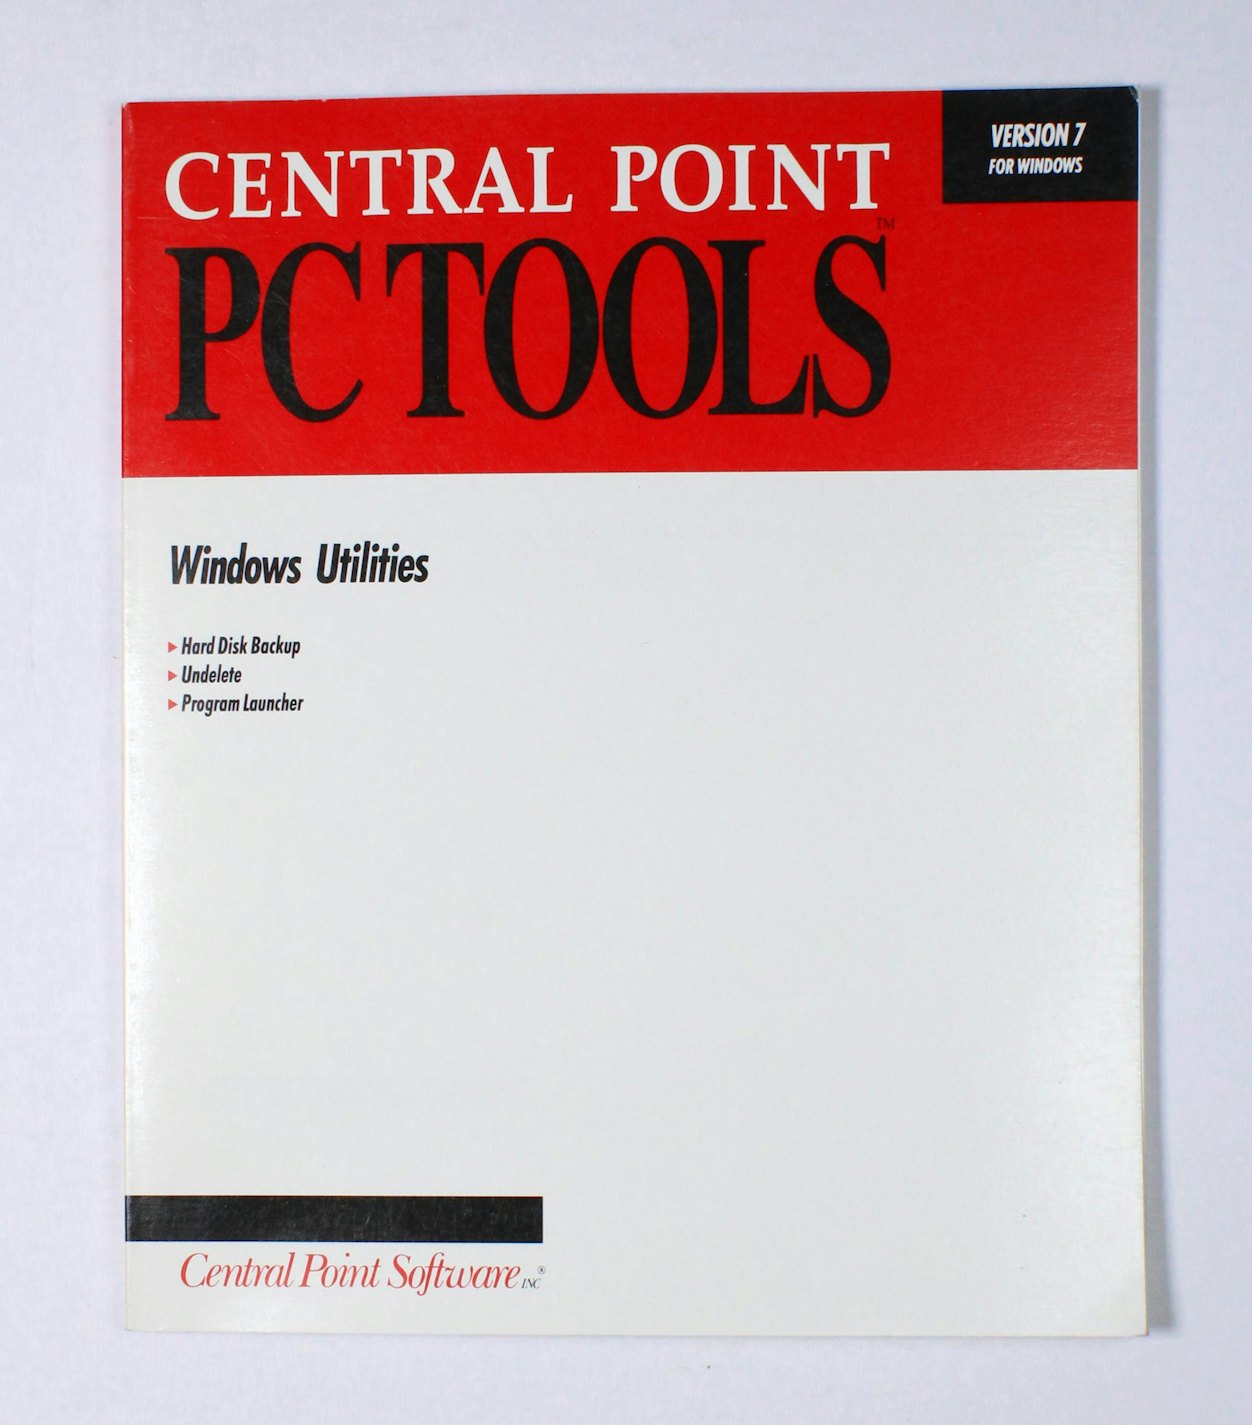 Central Point PC Tools: Windows Utilities